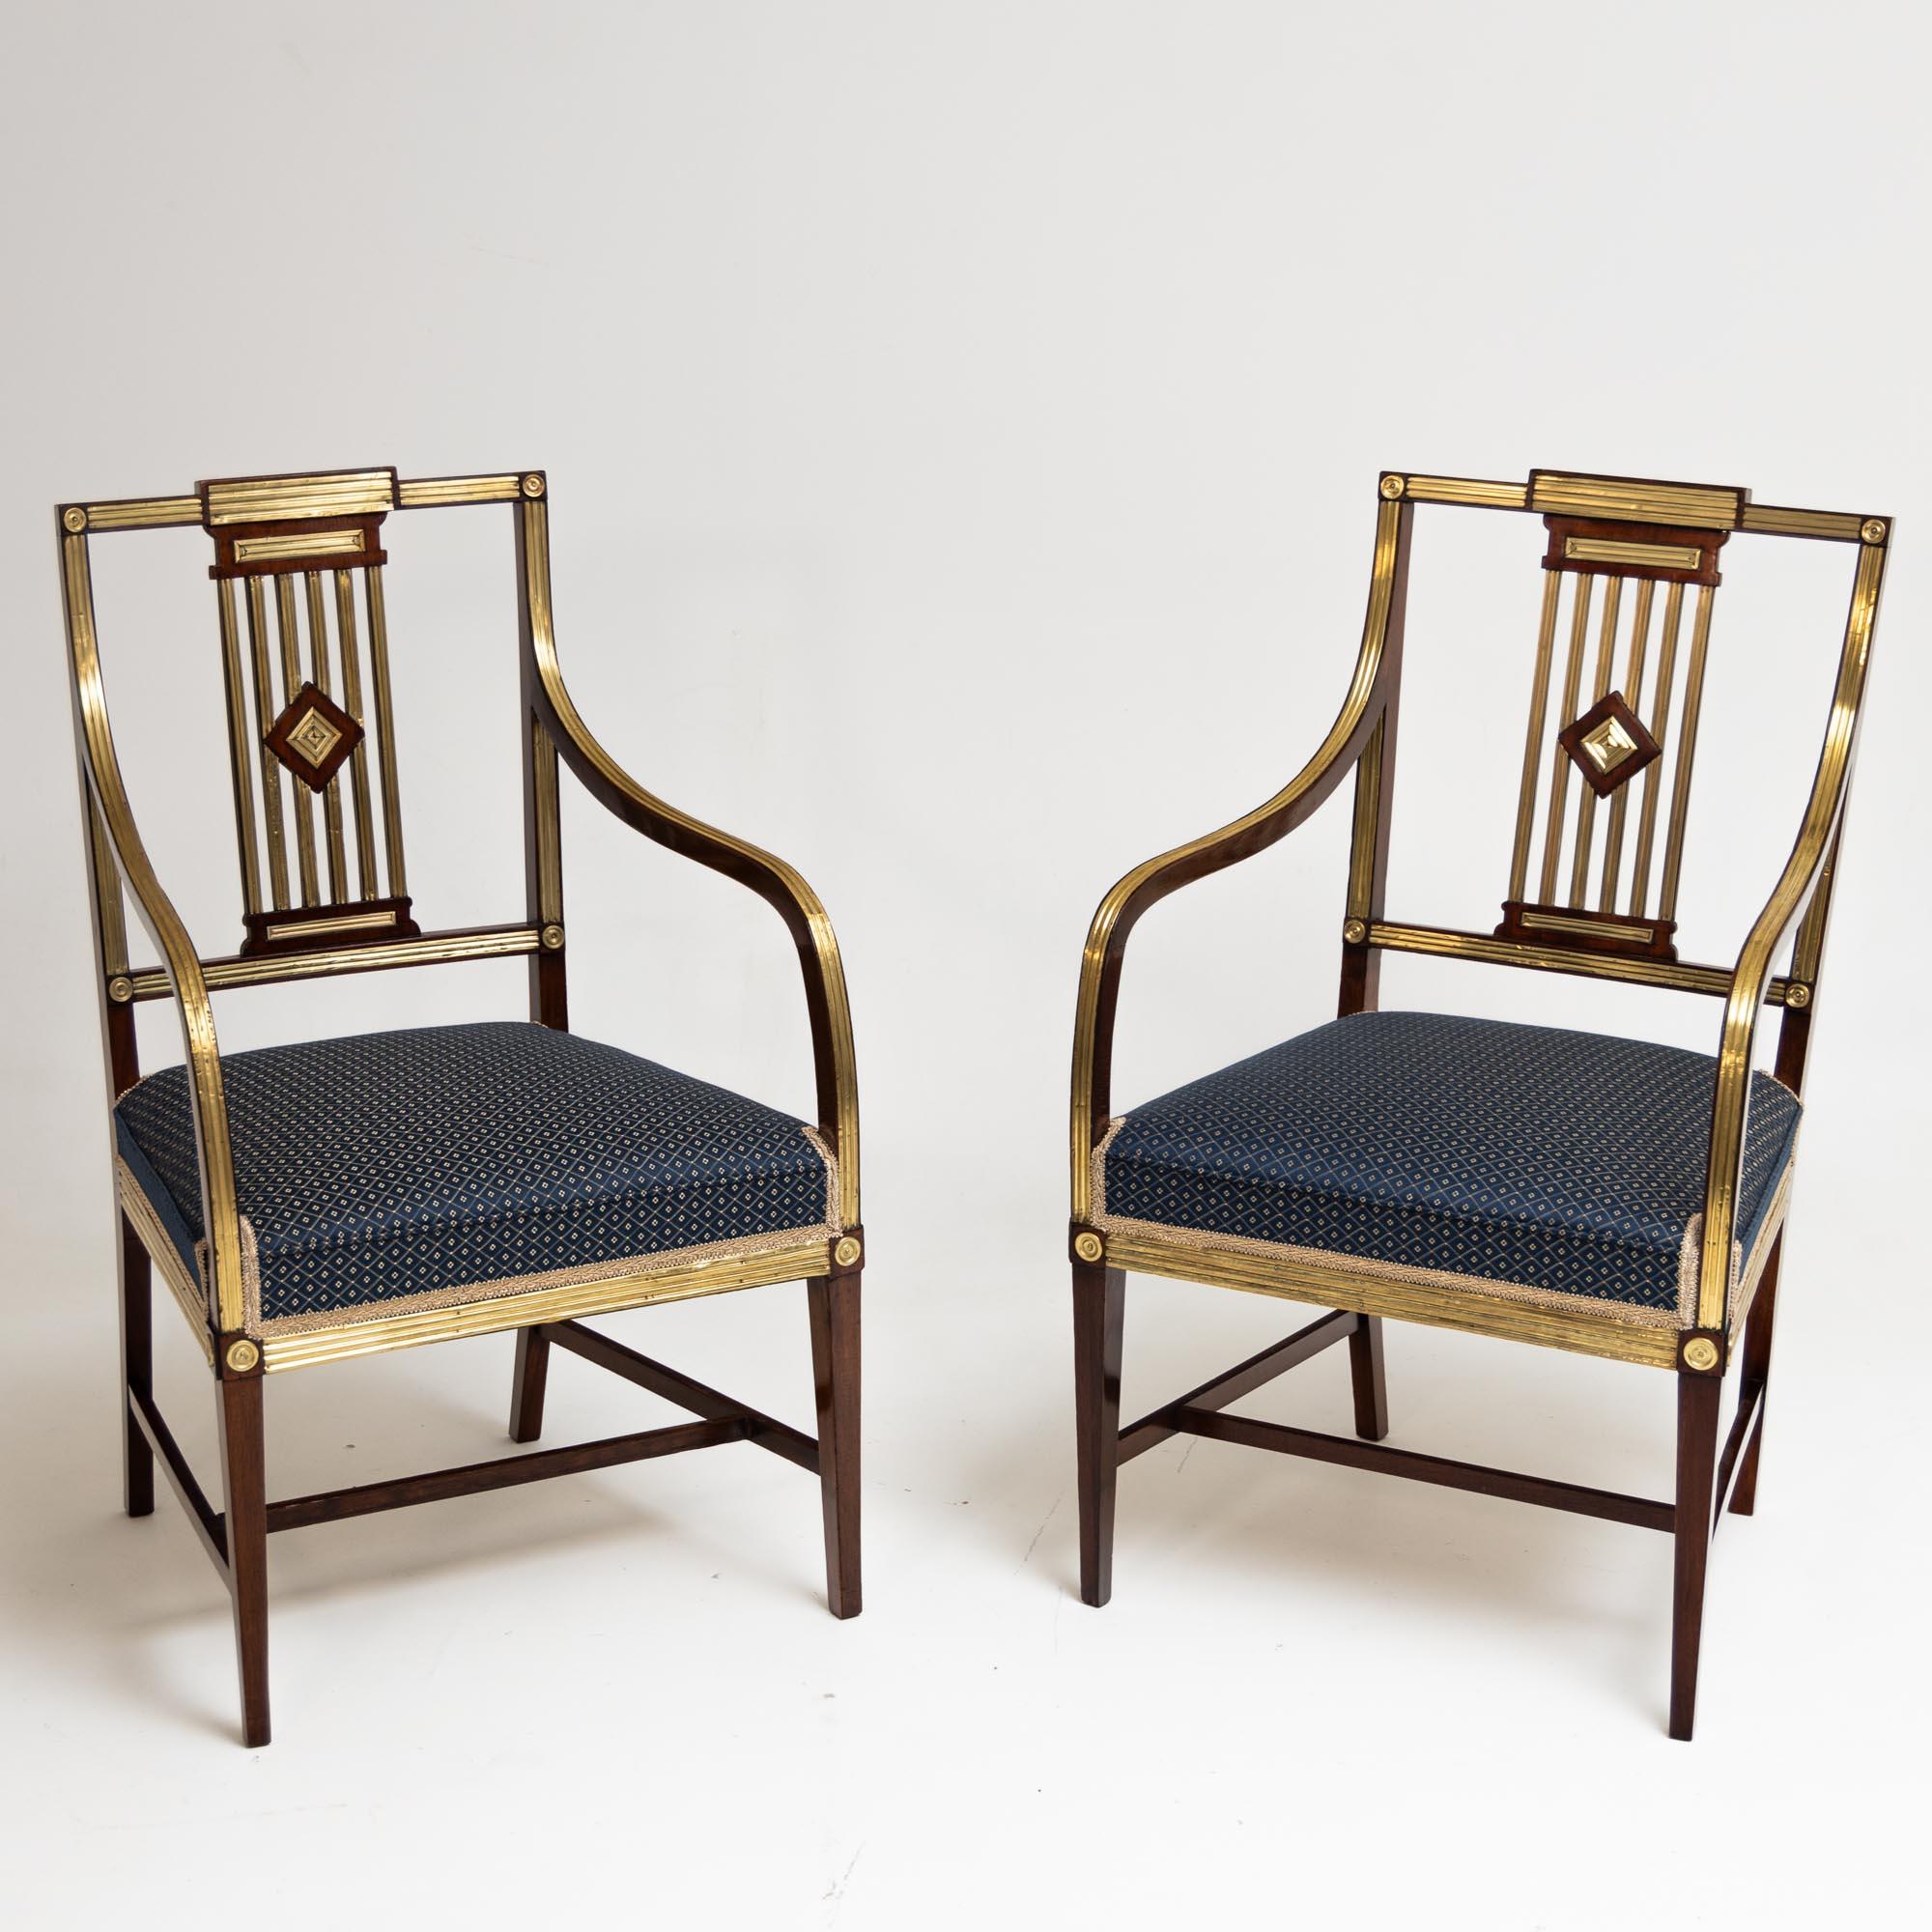 Two classicistic mahogany armchairs with brass decoration and openwork backs. The chairs stand on square pointed legs with H-shaped bracing, which merge into elegantly curved, high-set armrests with gilded decoration. The seats are reupholstered and